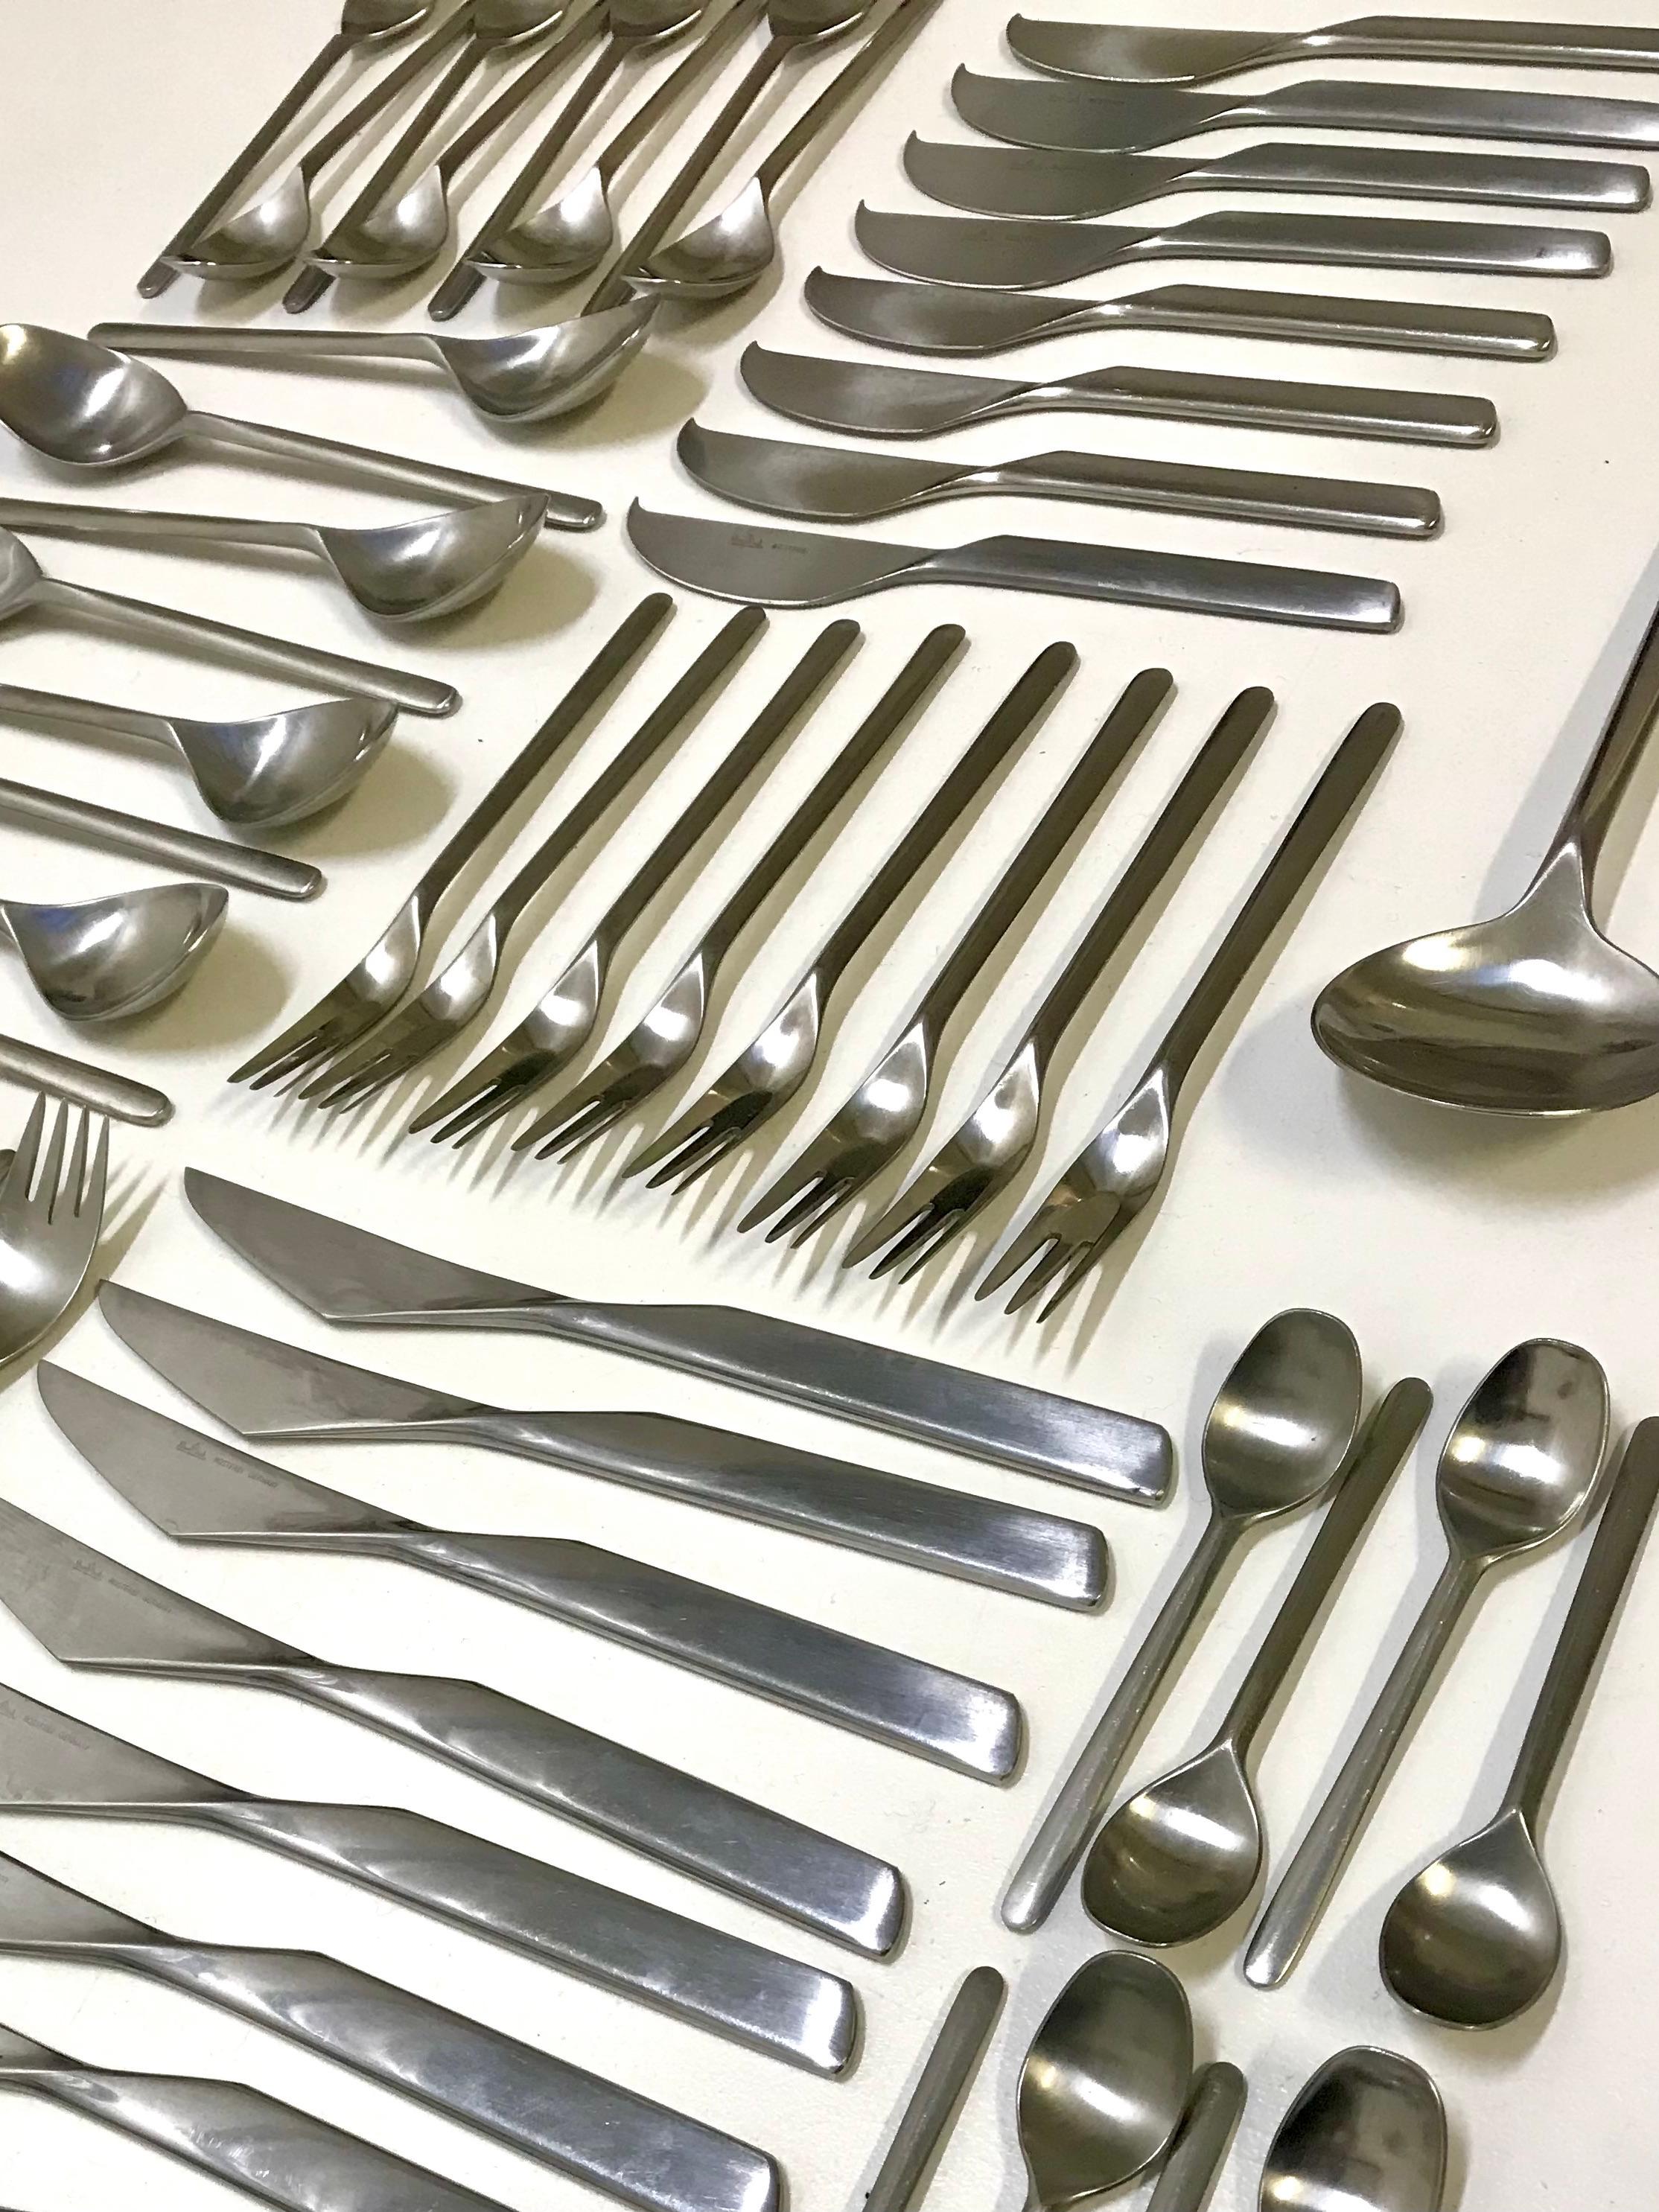 Complete set of 58 place settings by the famous Finnish designer created for Rosenthal and part, since 1963, of the permanent collections of MOMA.
Executed in stainless steel it combines functionality and elegance with the atypical shape of its